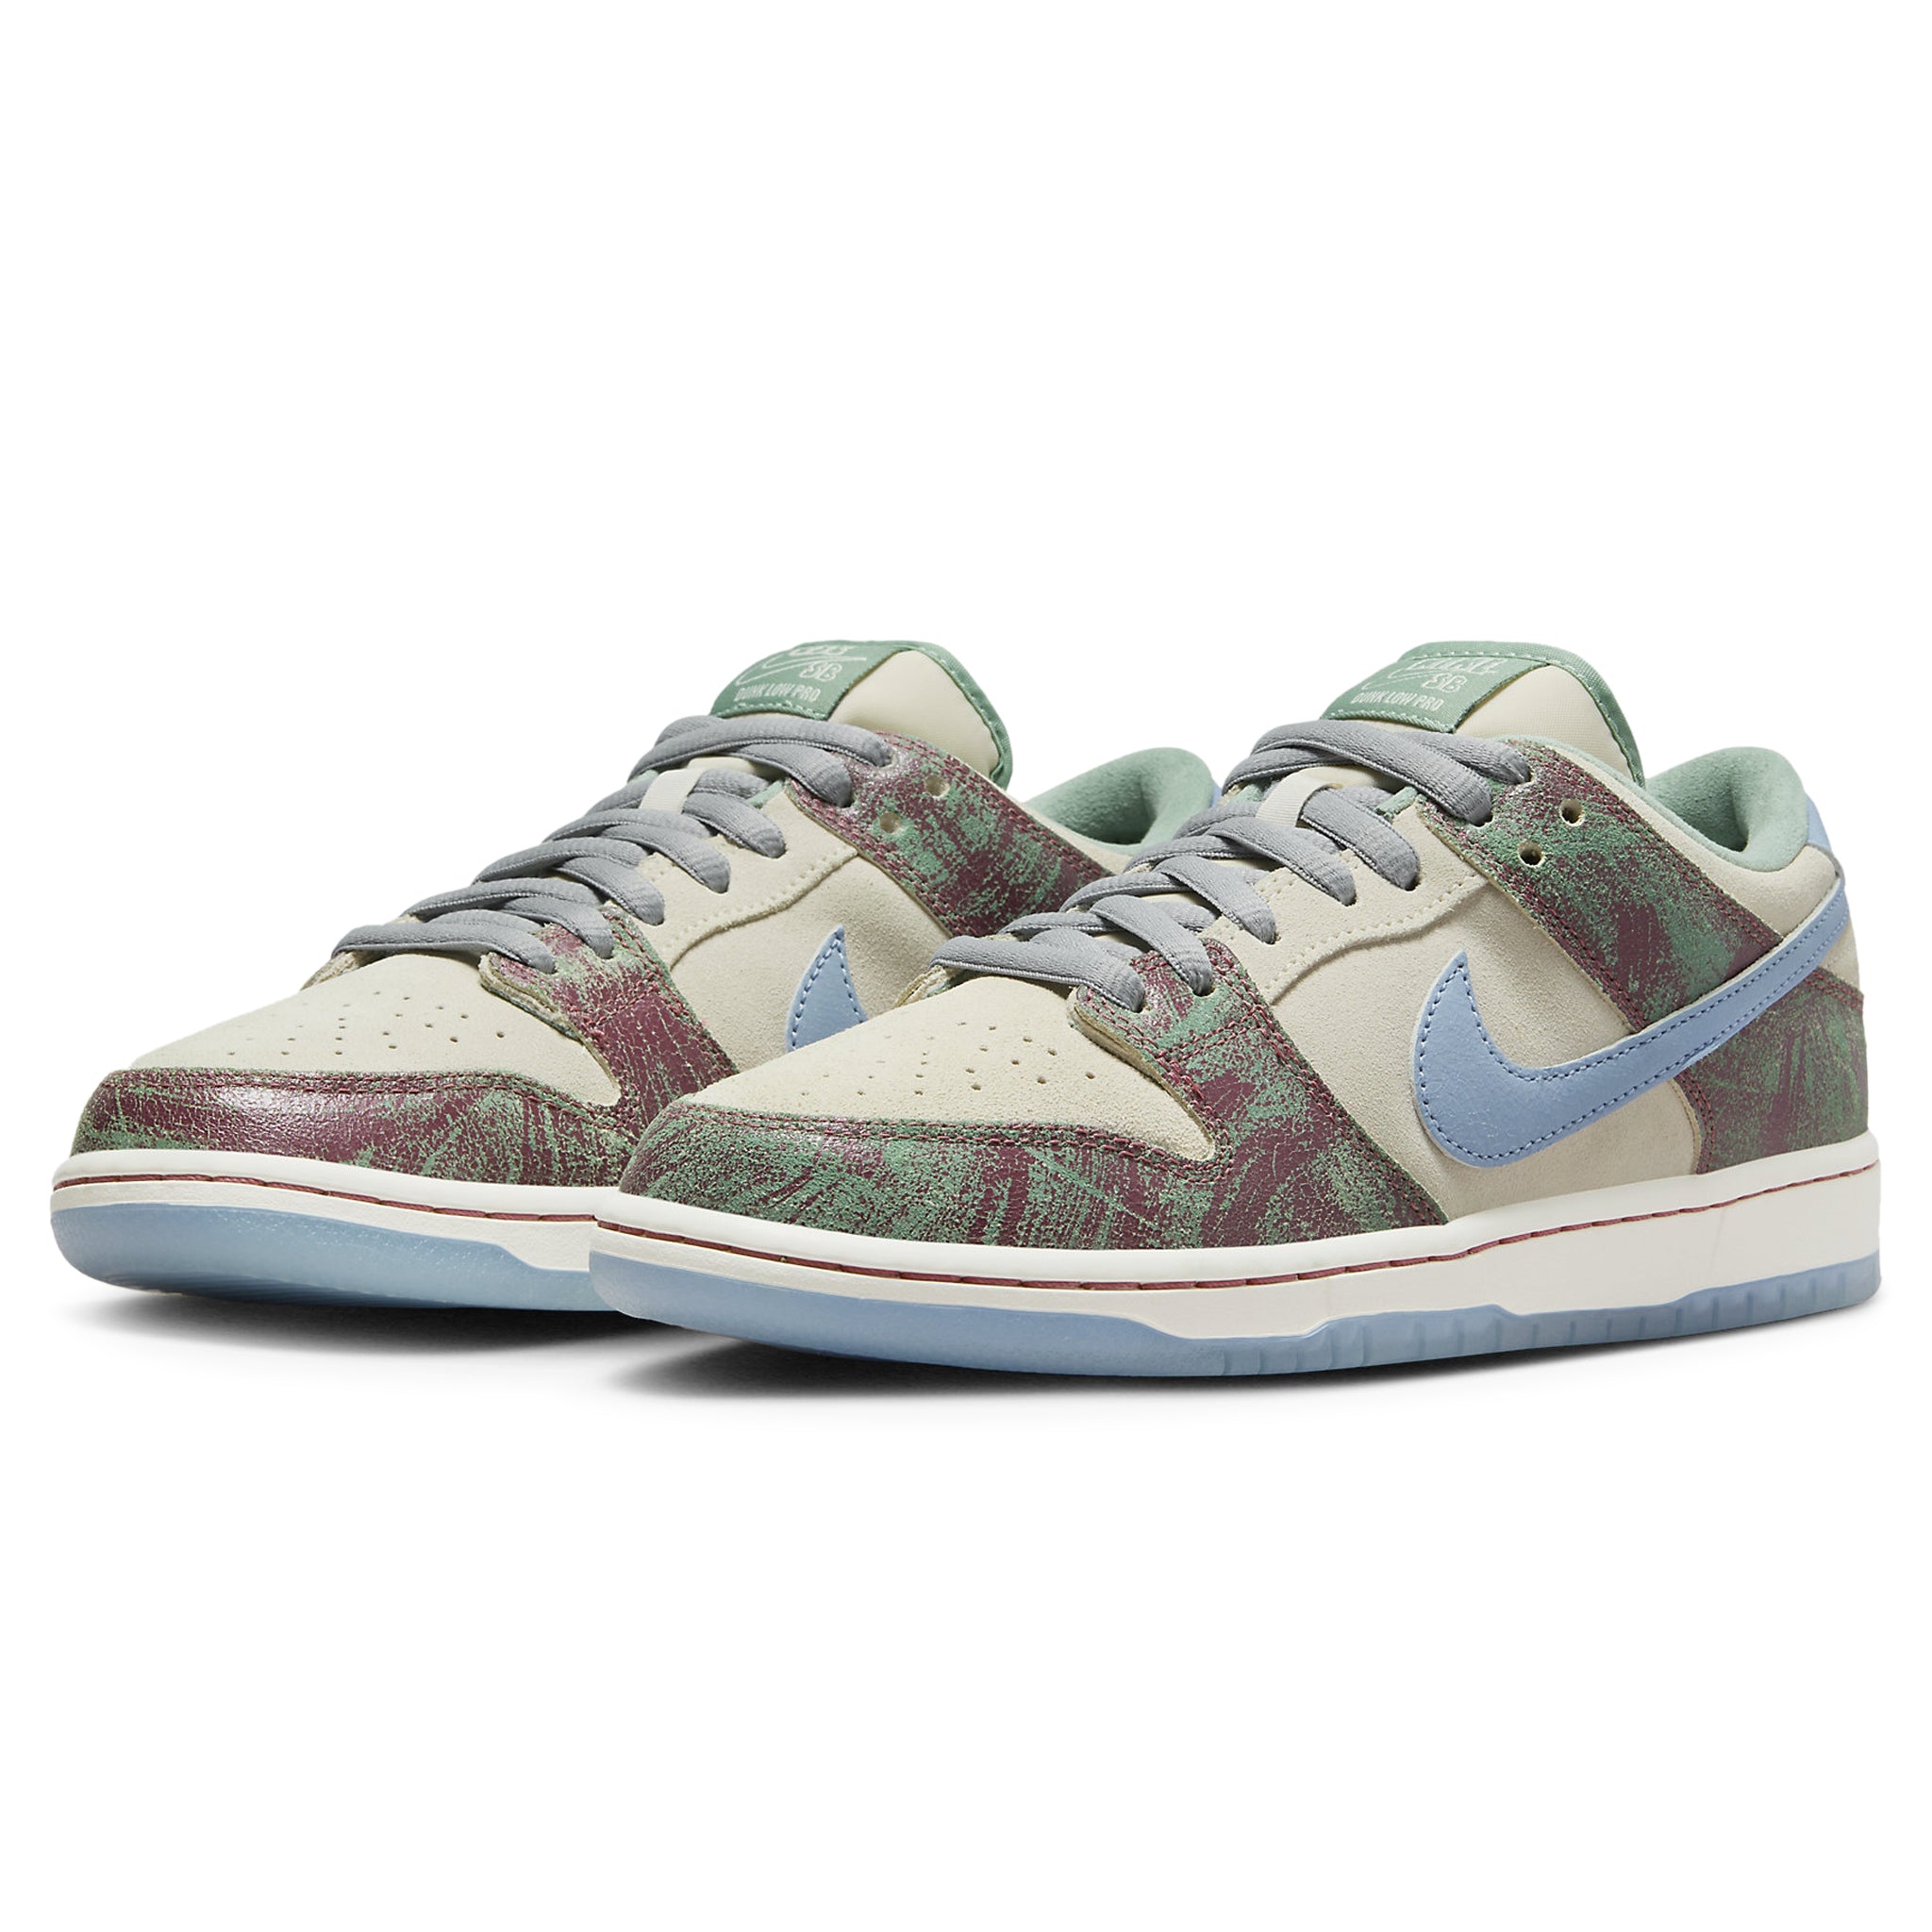 Front side view of Crenshaw Skate Club x Nike SB Dunk Low FN4193-100